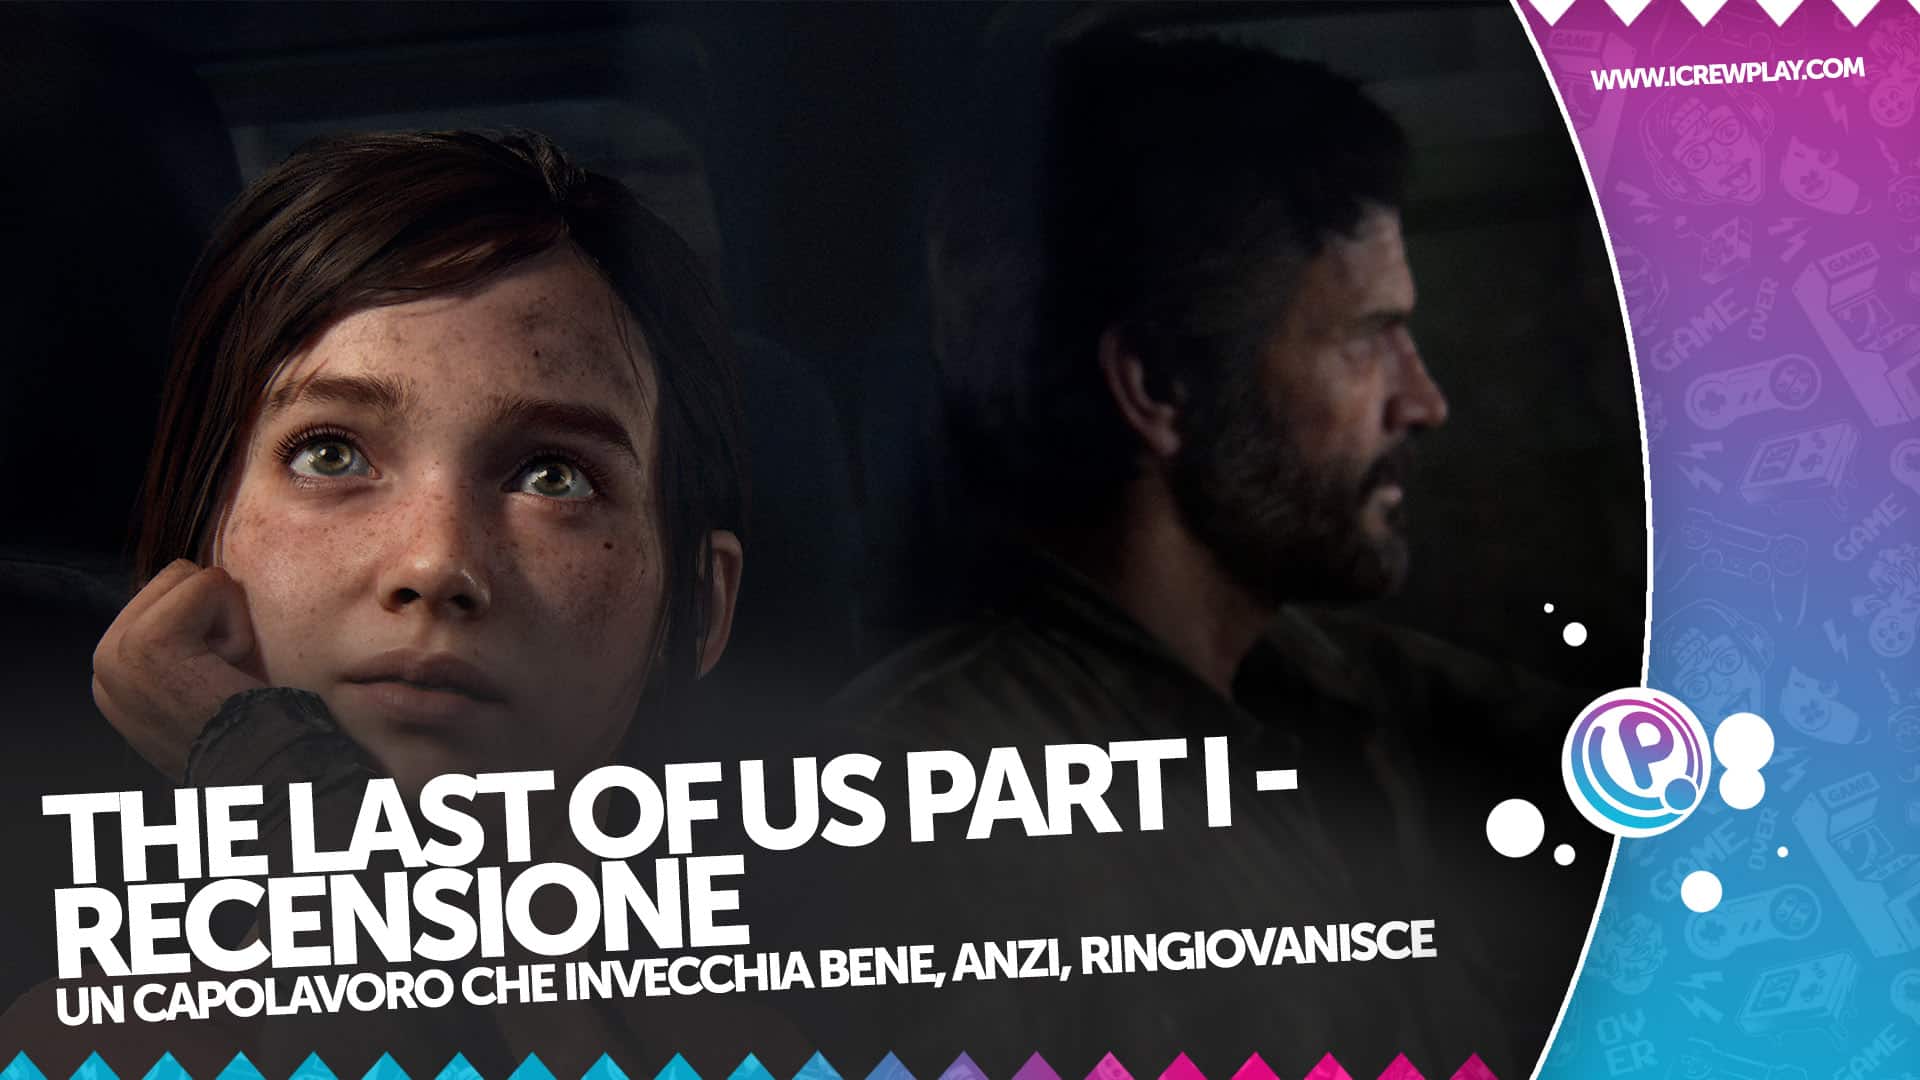 The Last of Us Part I Remake Recensione